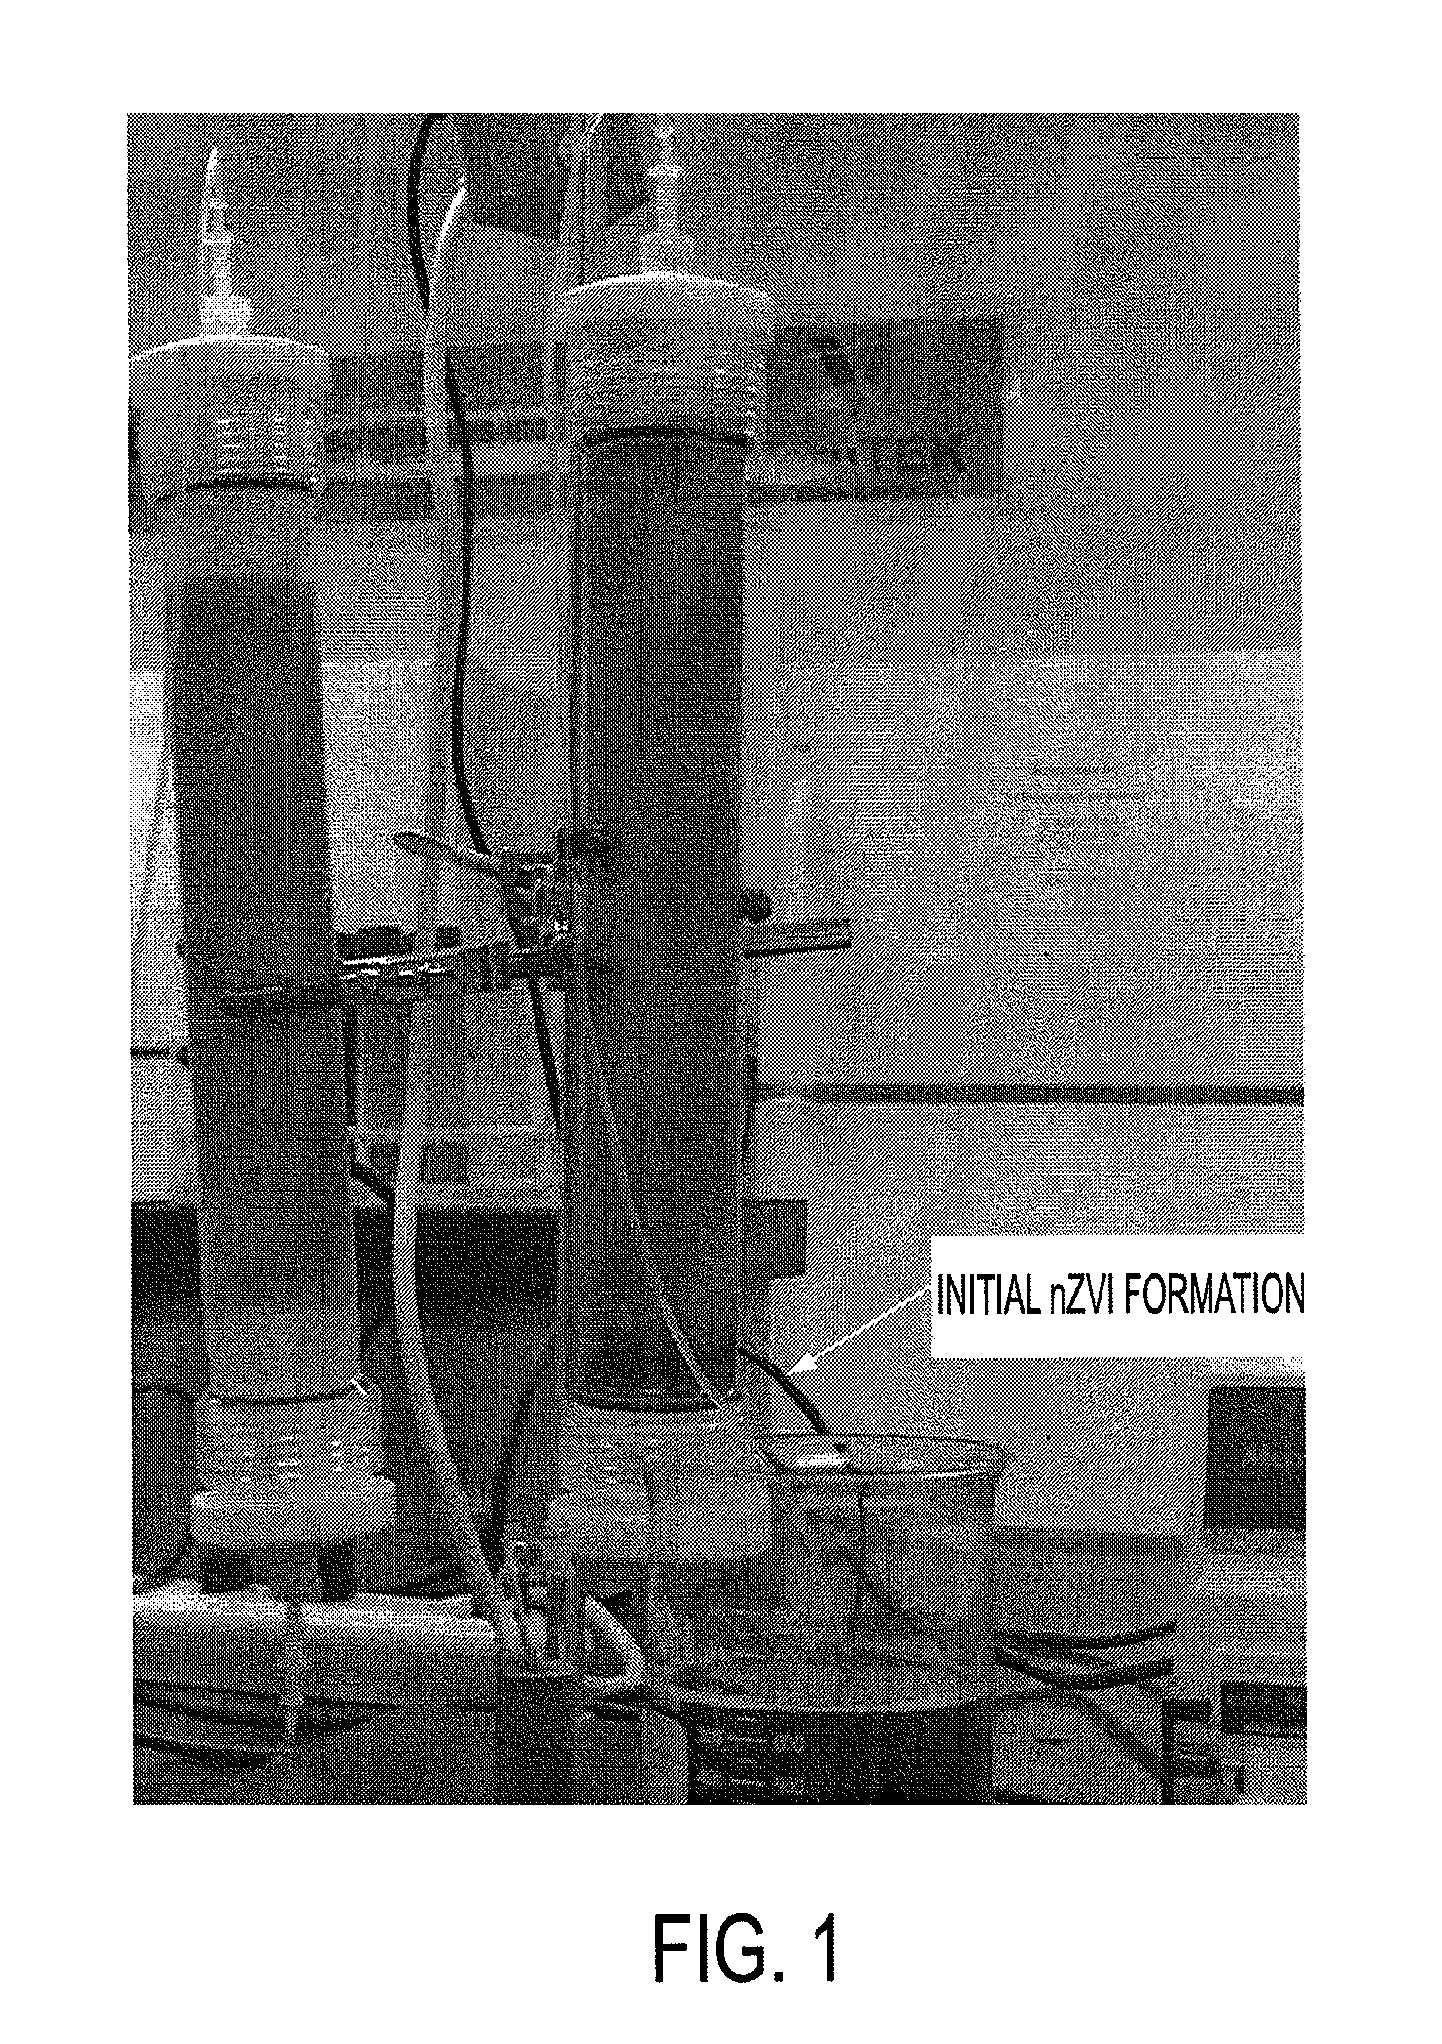 Polymer coated nanoparticle activation of oxidants for remediation and methods of use thereof